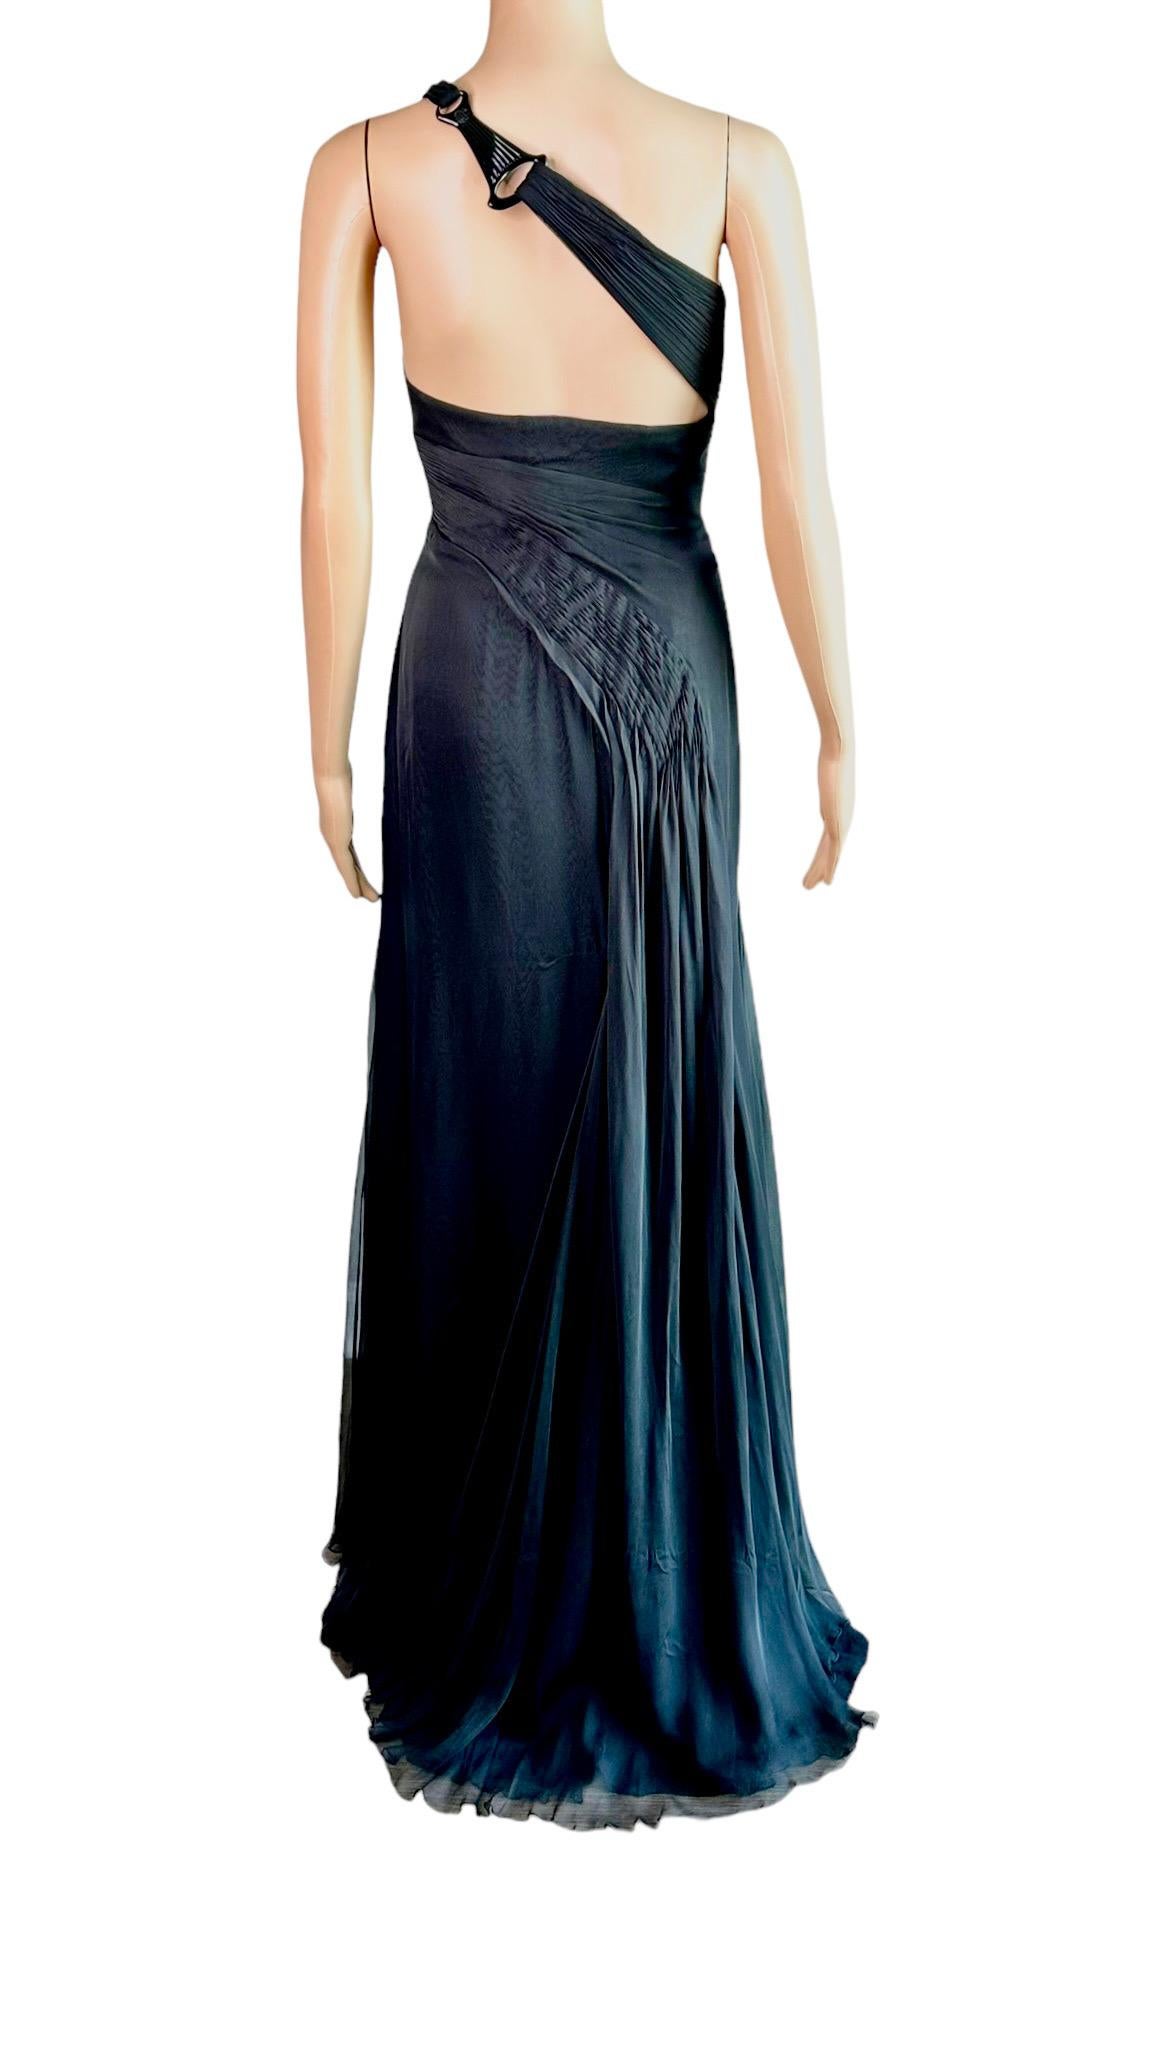 Versace F/W 2006 Bustier One Shoulder Black Evening Dress In Good Condition For Sale In Naples, FL